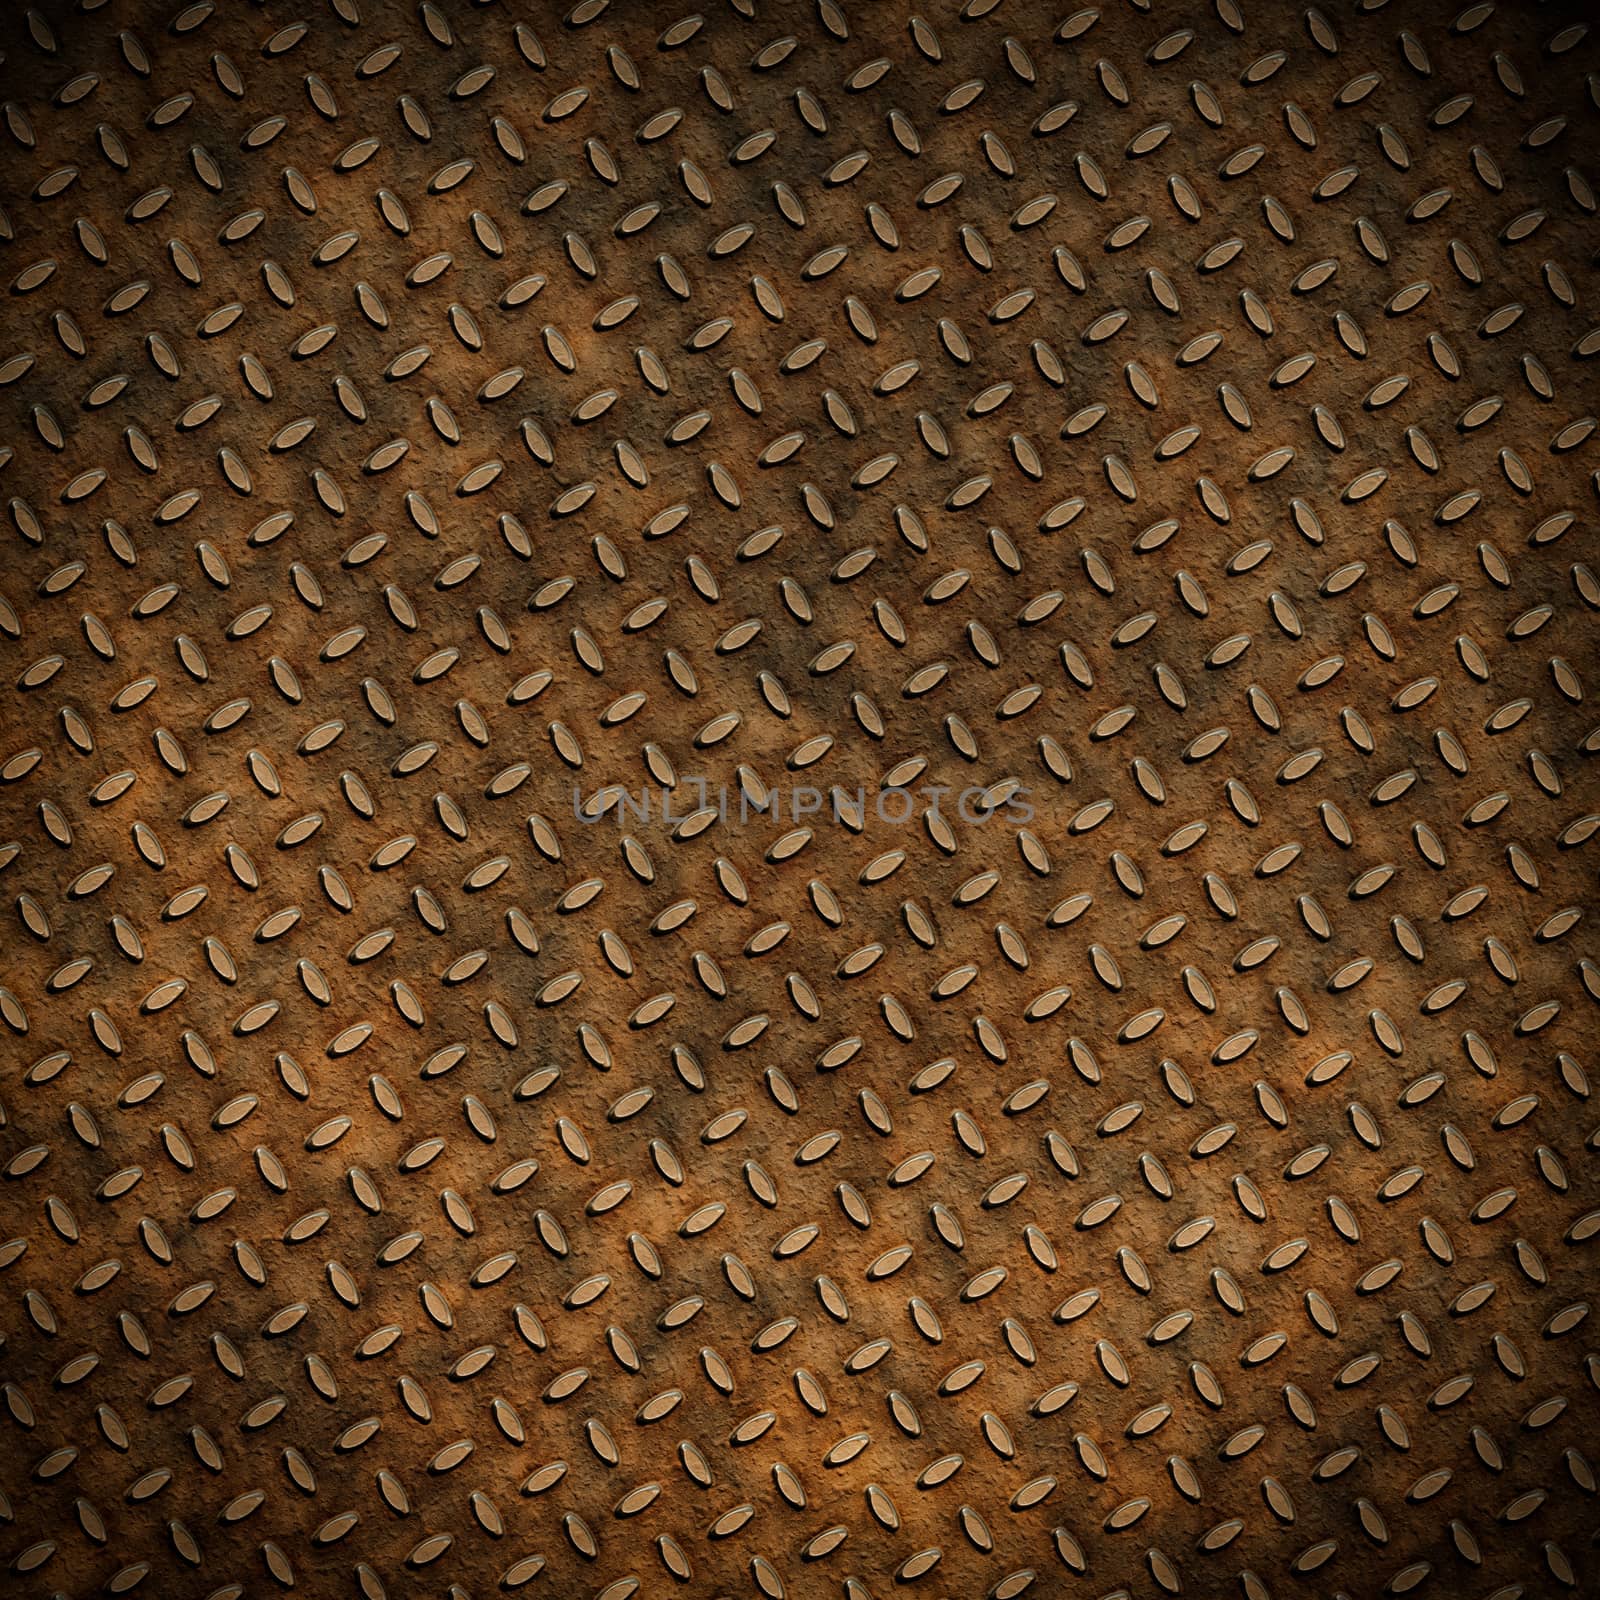 Grunge metal diamond plate background or texture by Attila